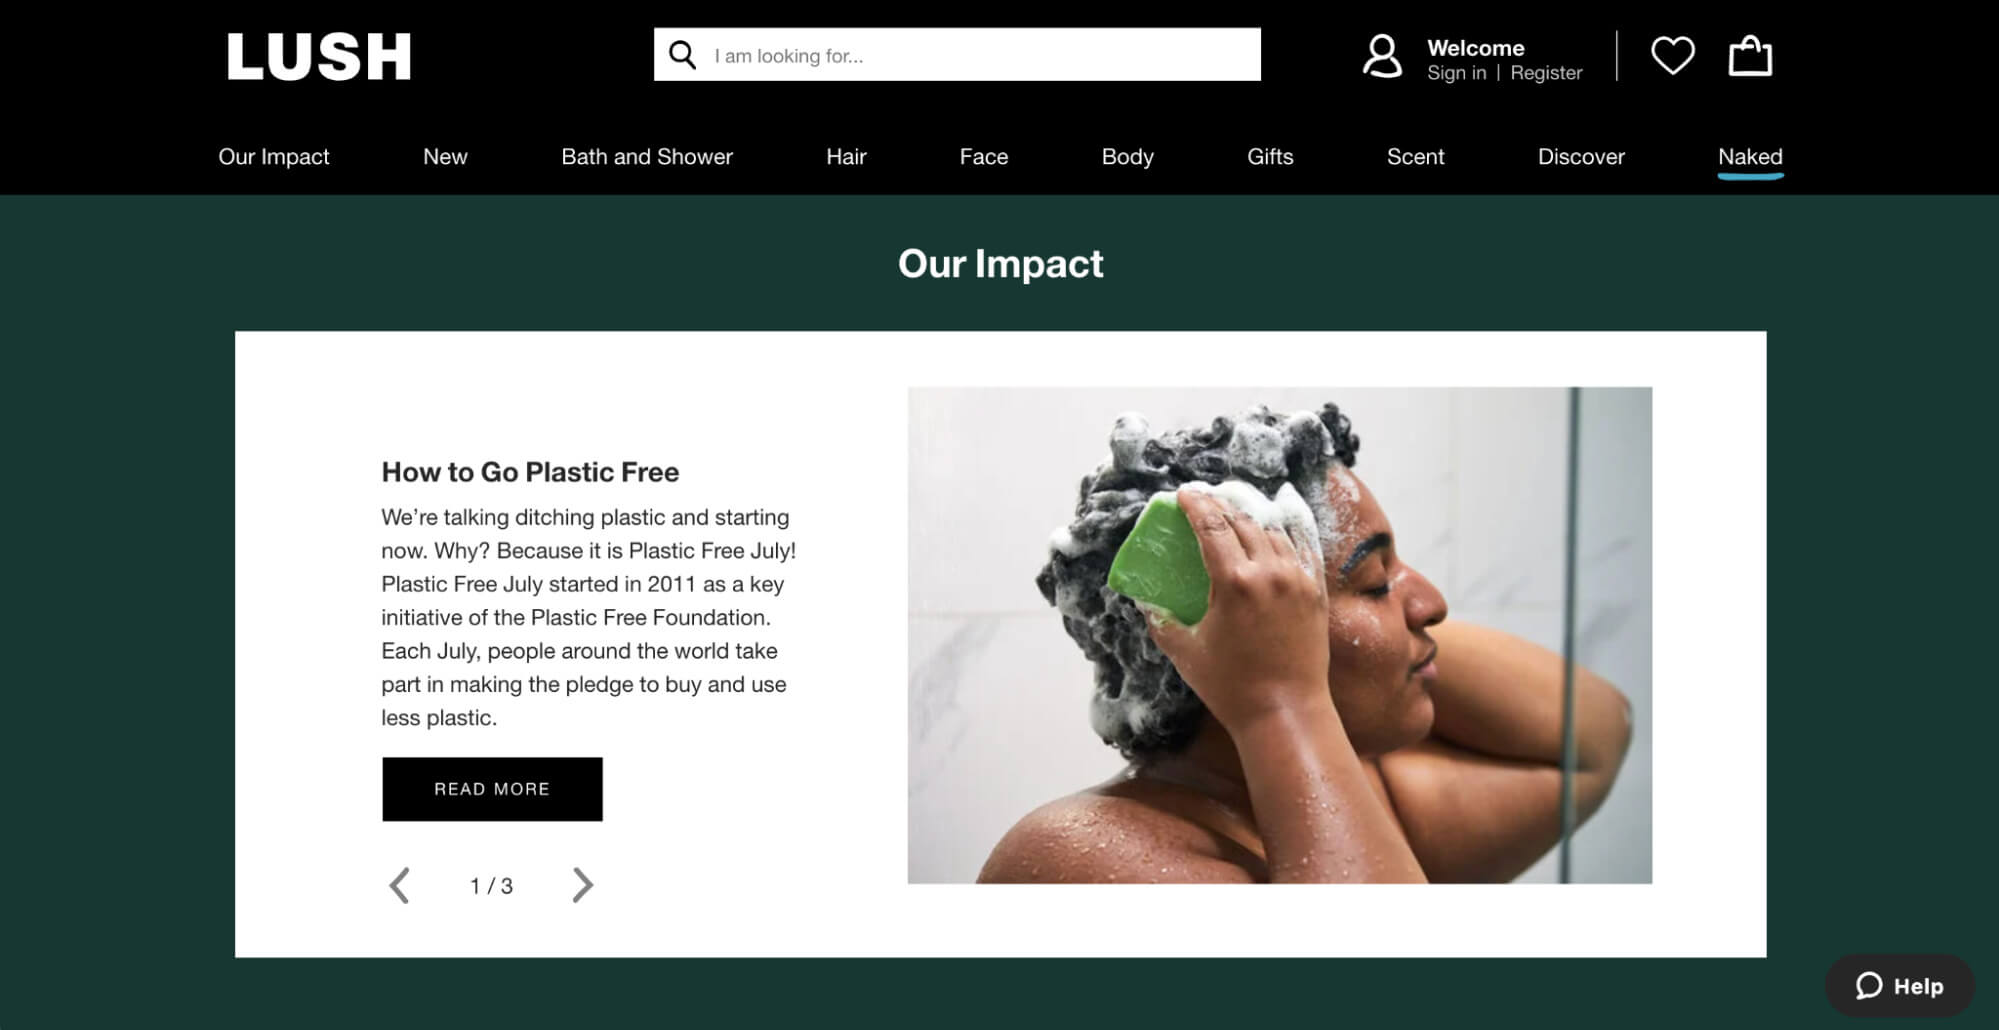 Eco-friendly brand messaging from LUSH